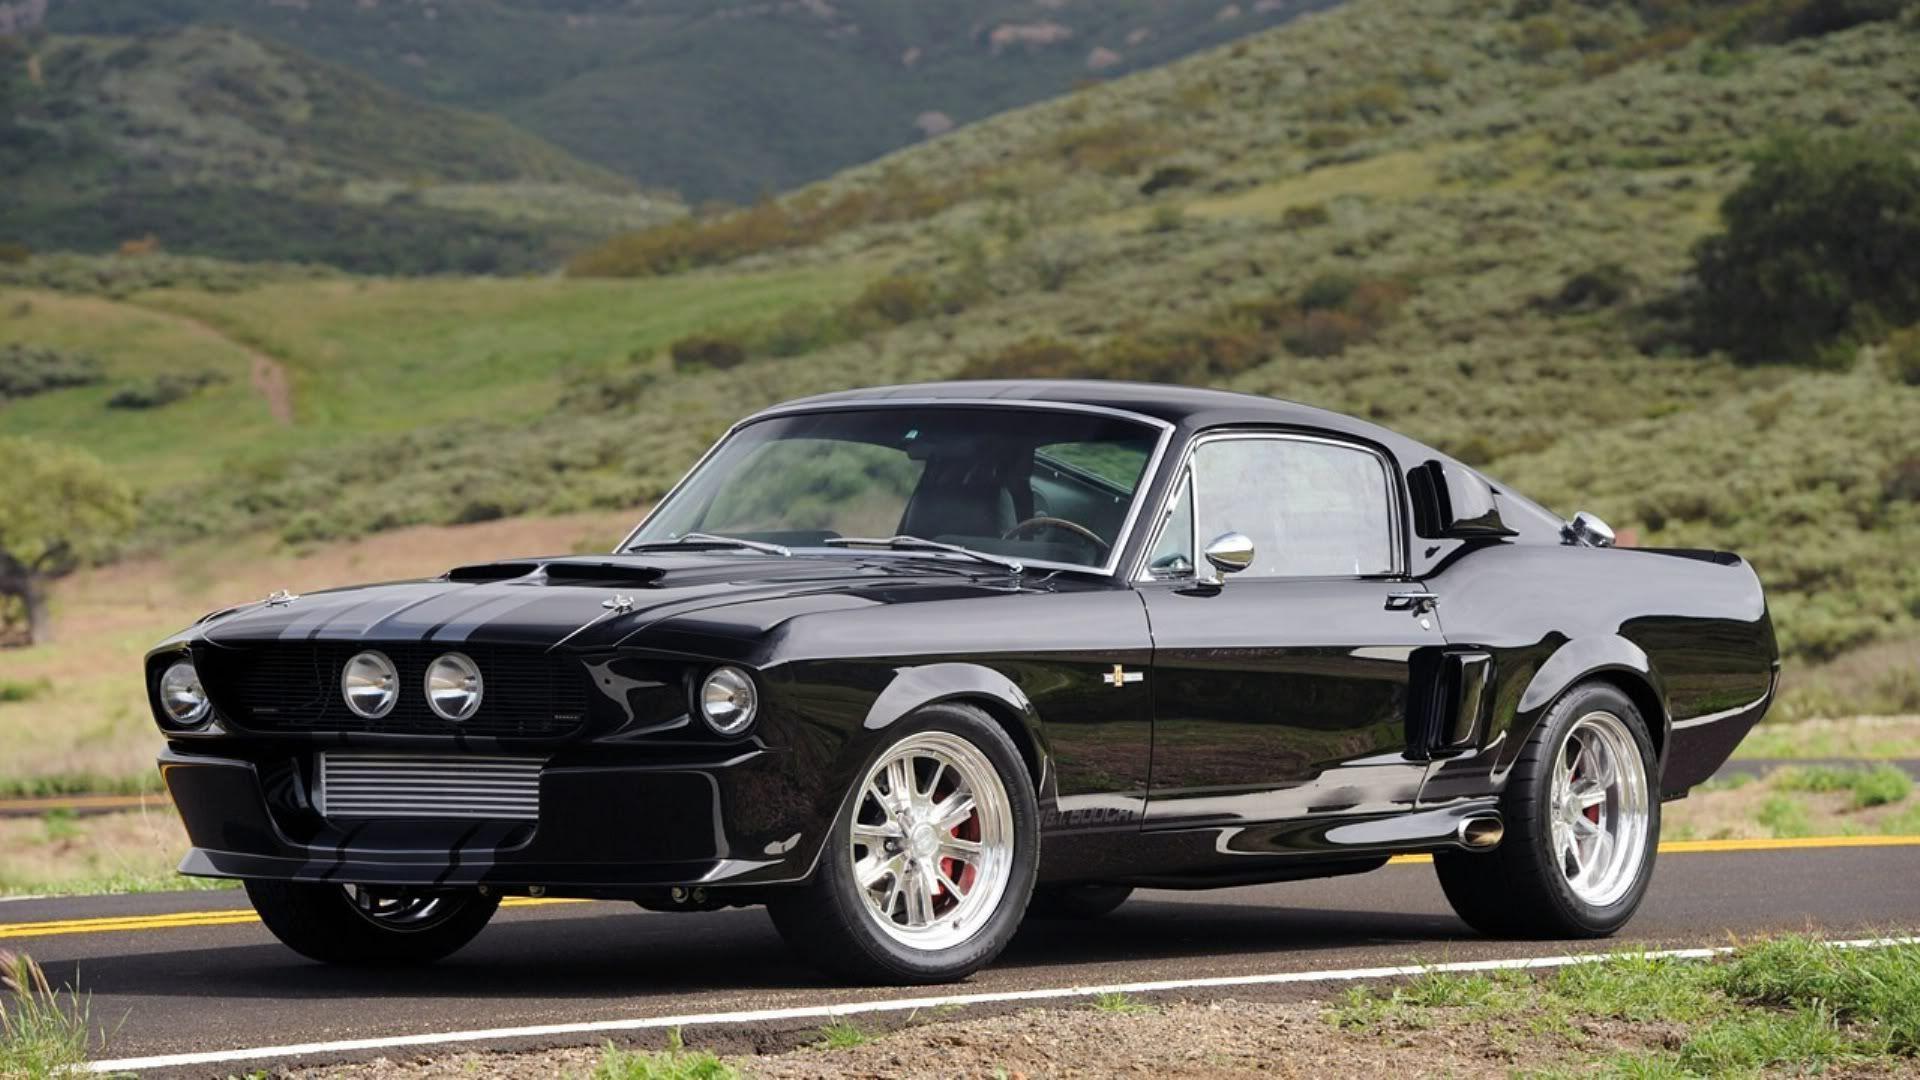 Ford Mustang Old Hd Wallpaper